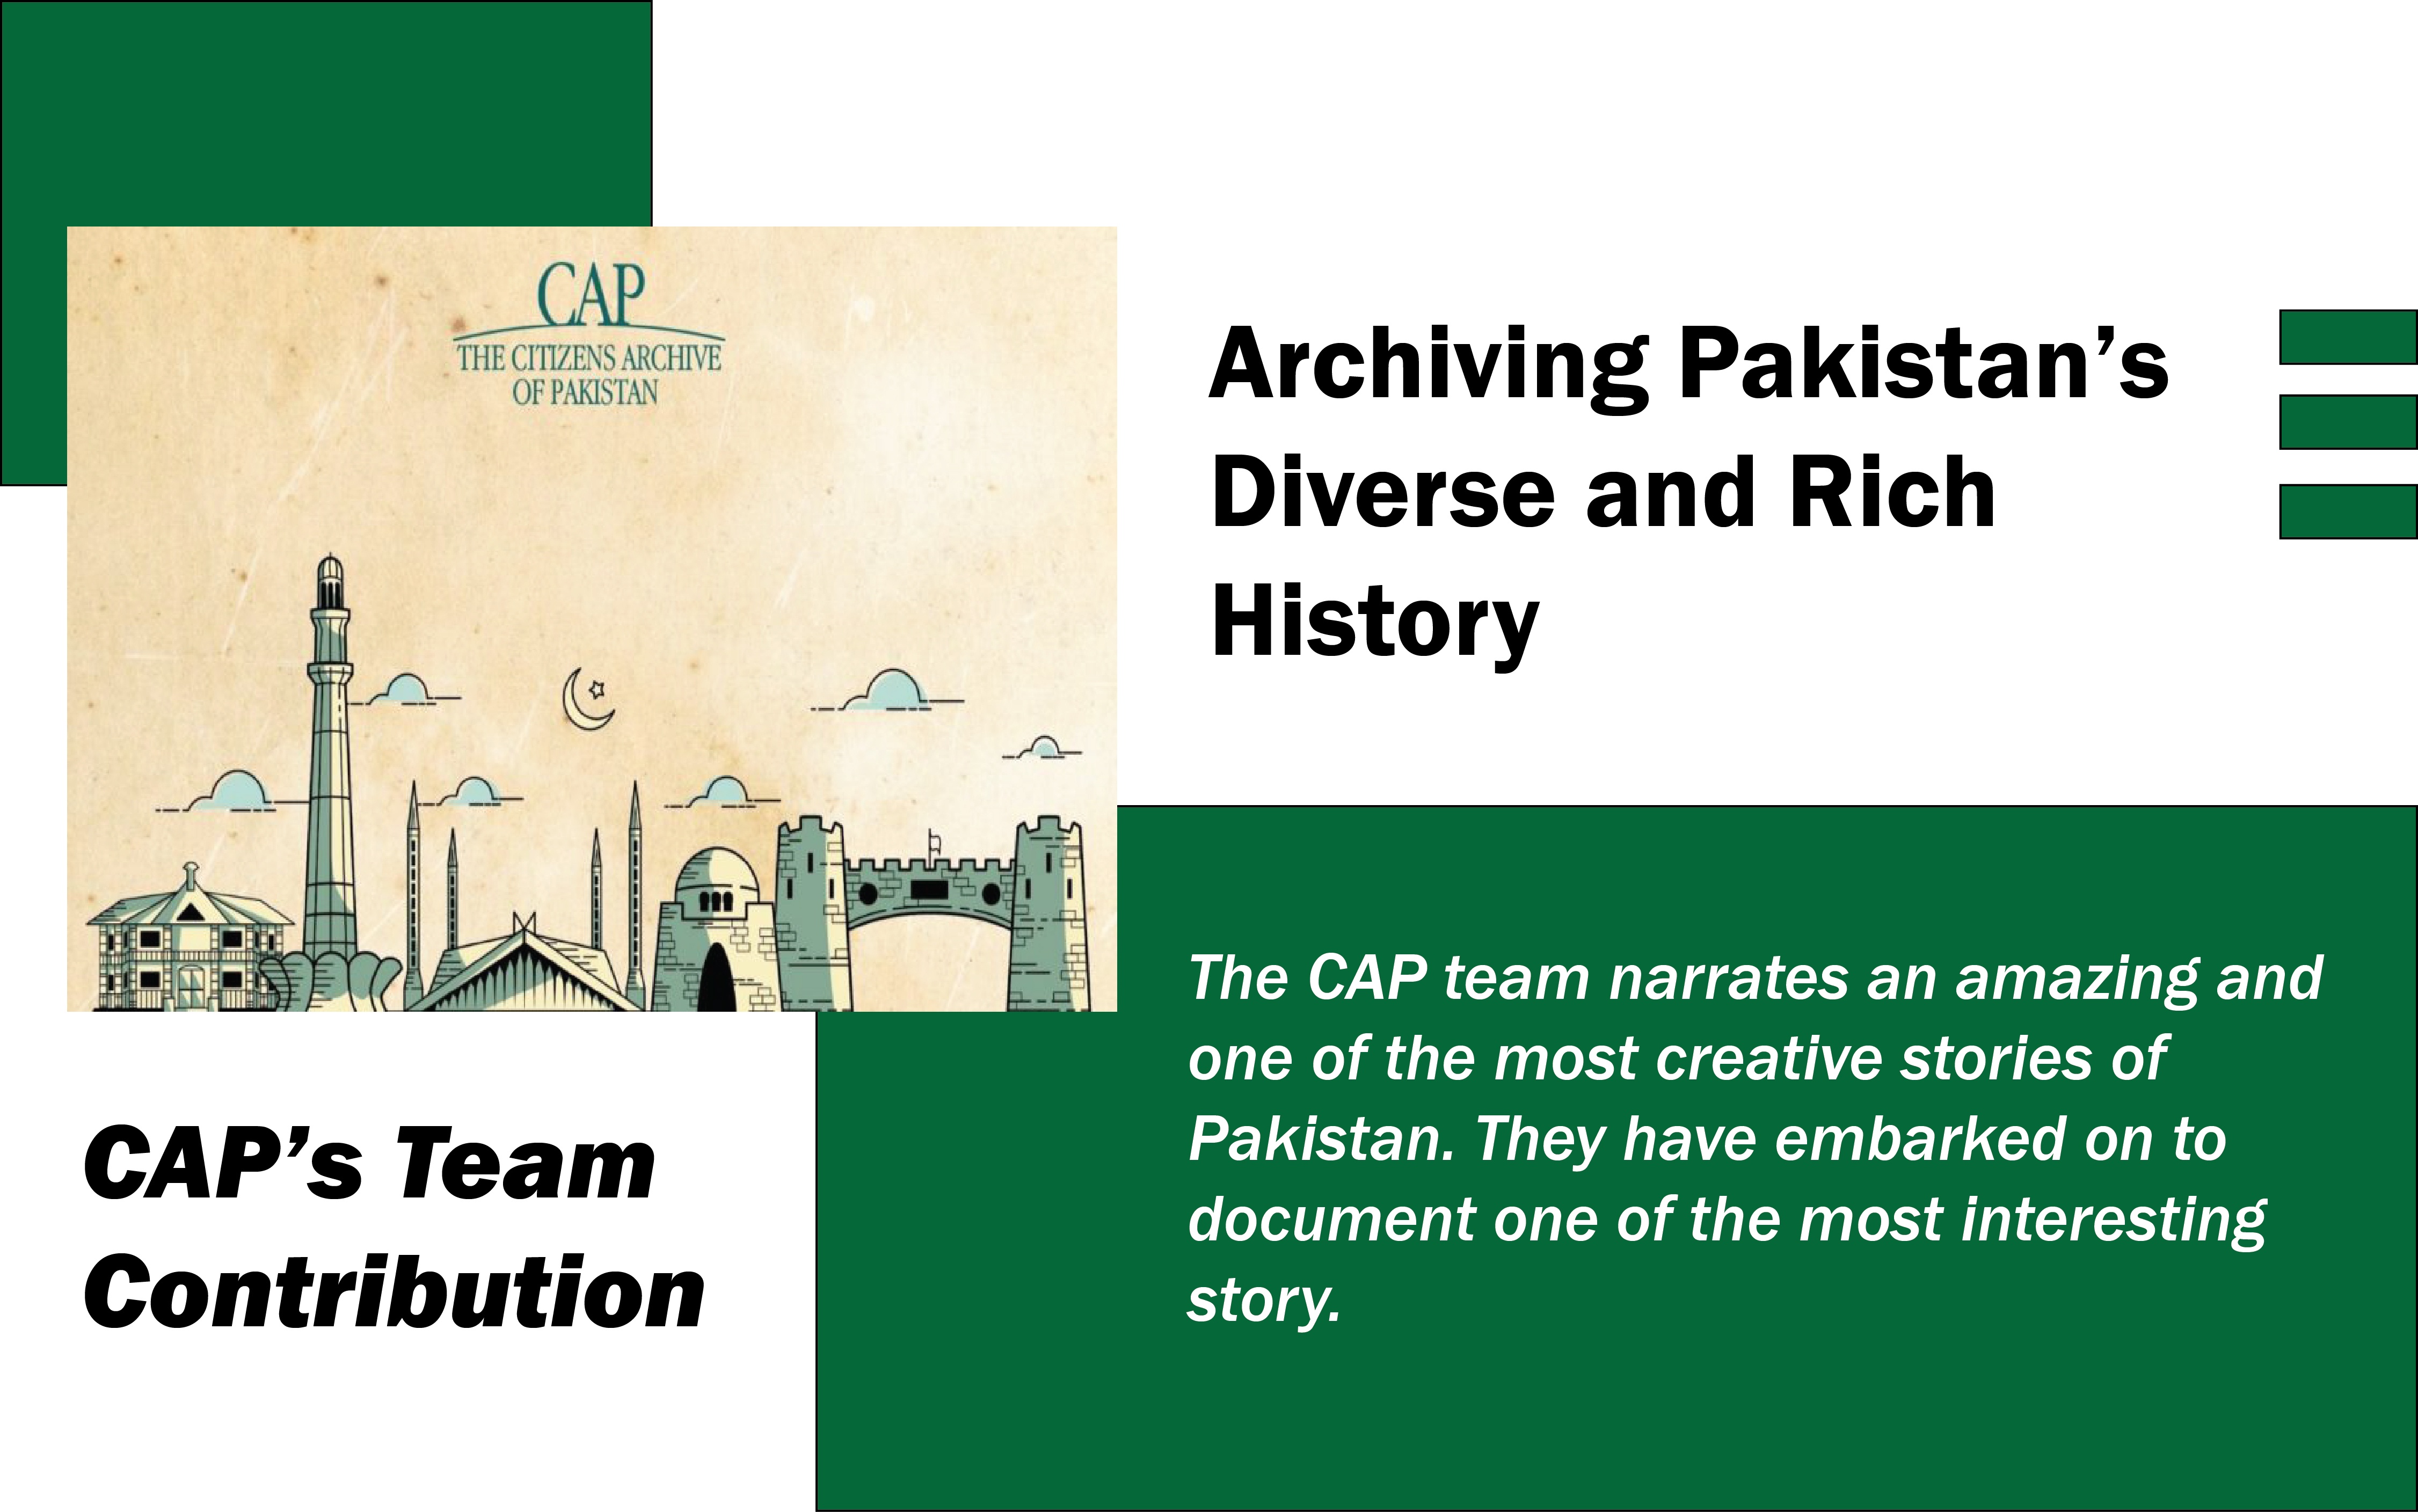 Archiving Pakistan’s Diverse and Rich History